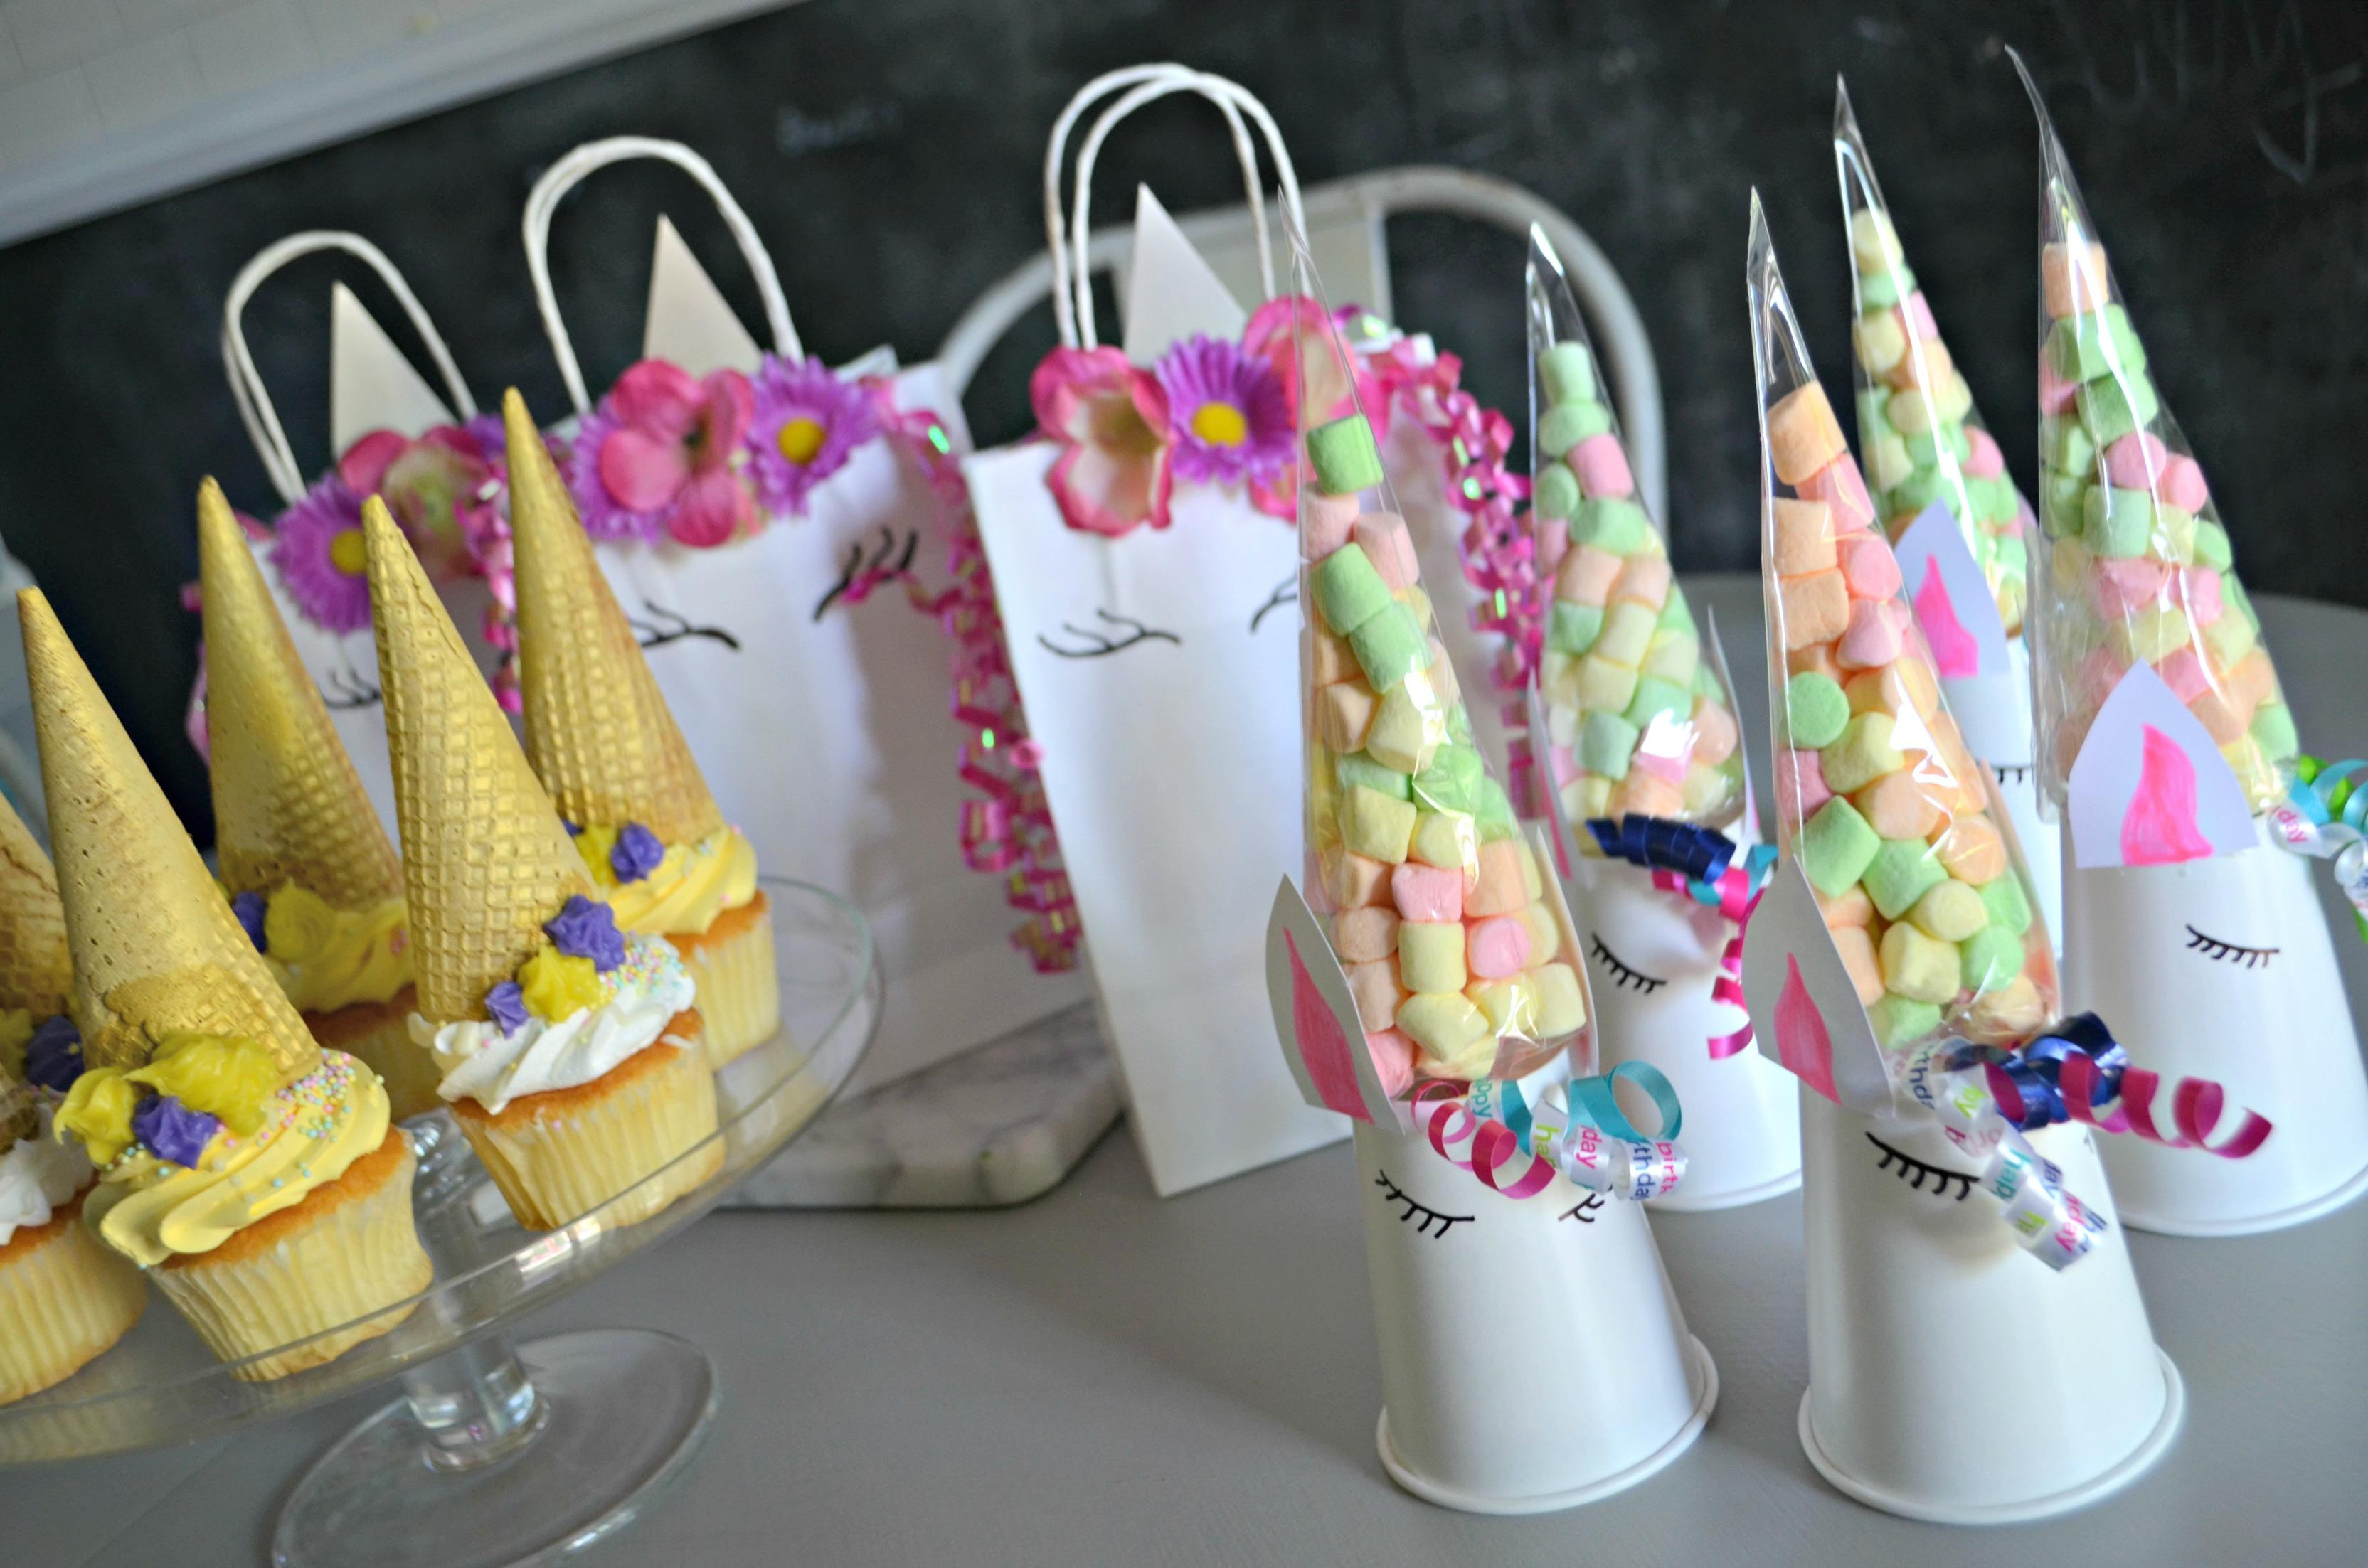 Unicorn Party Decorating Ideas
 Make These 3 Frugal Cute and Easy DIY Unicorn Birthday